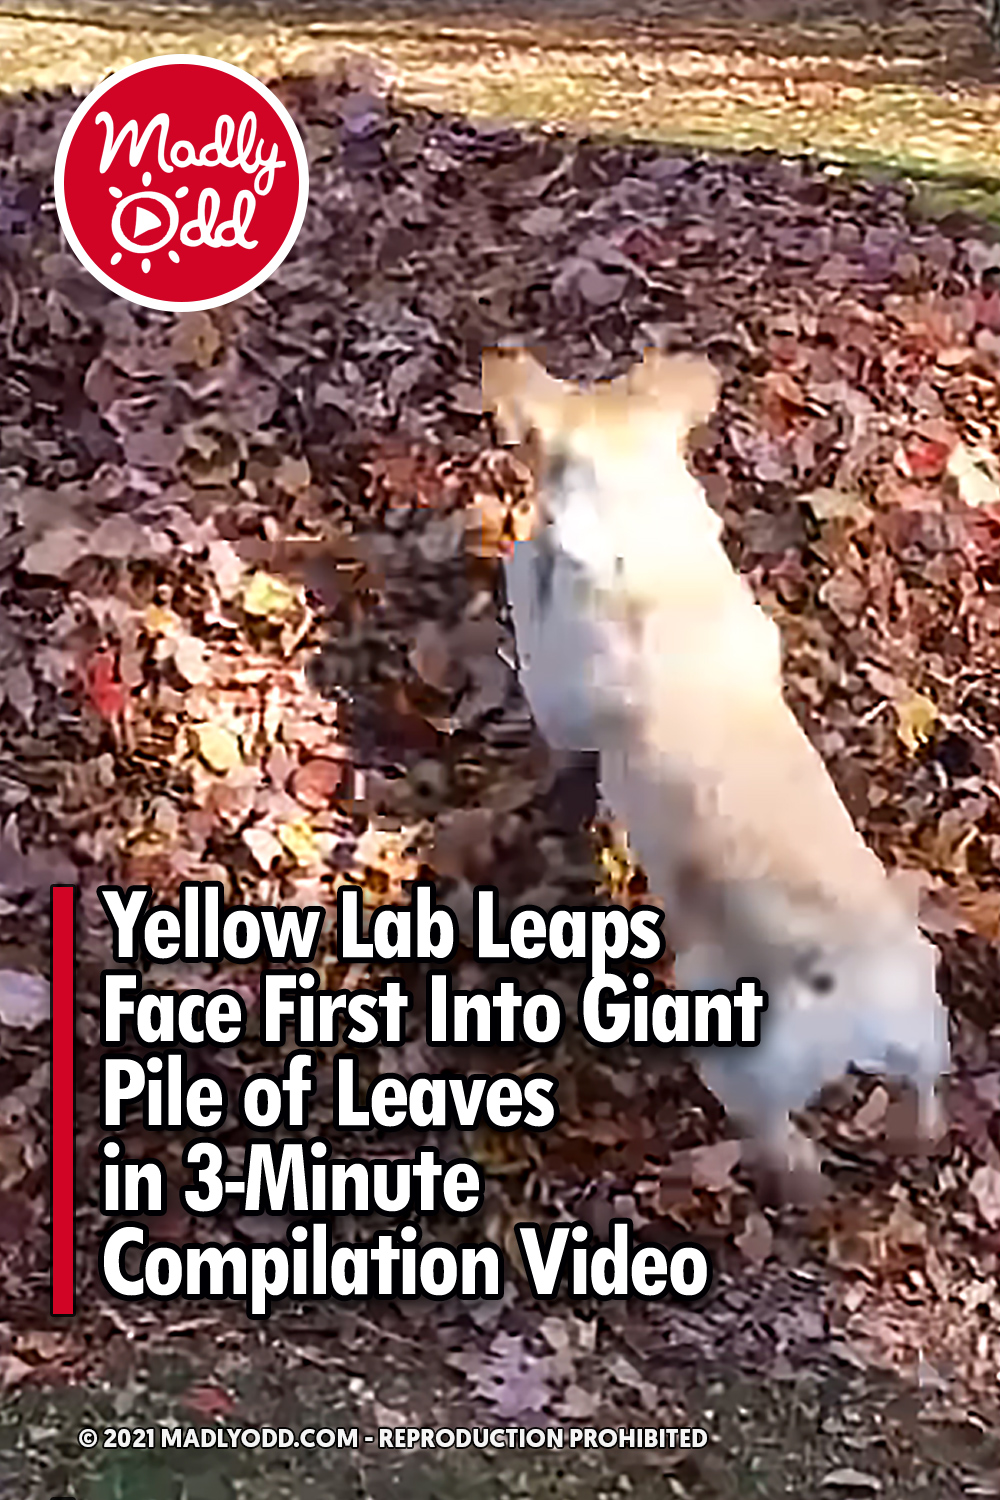 Yellow Lab Leaps Face First Into Giant Pile of Leaves in 3-Minute Compilation Video